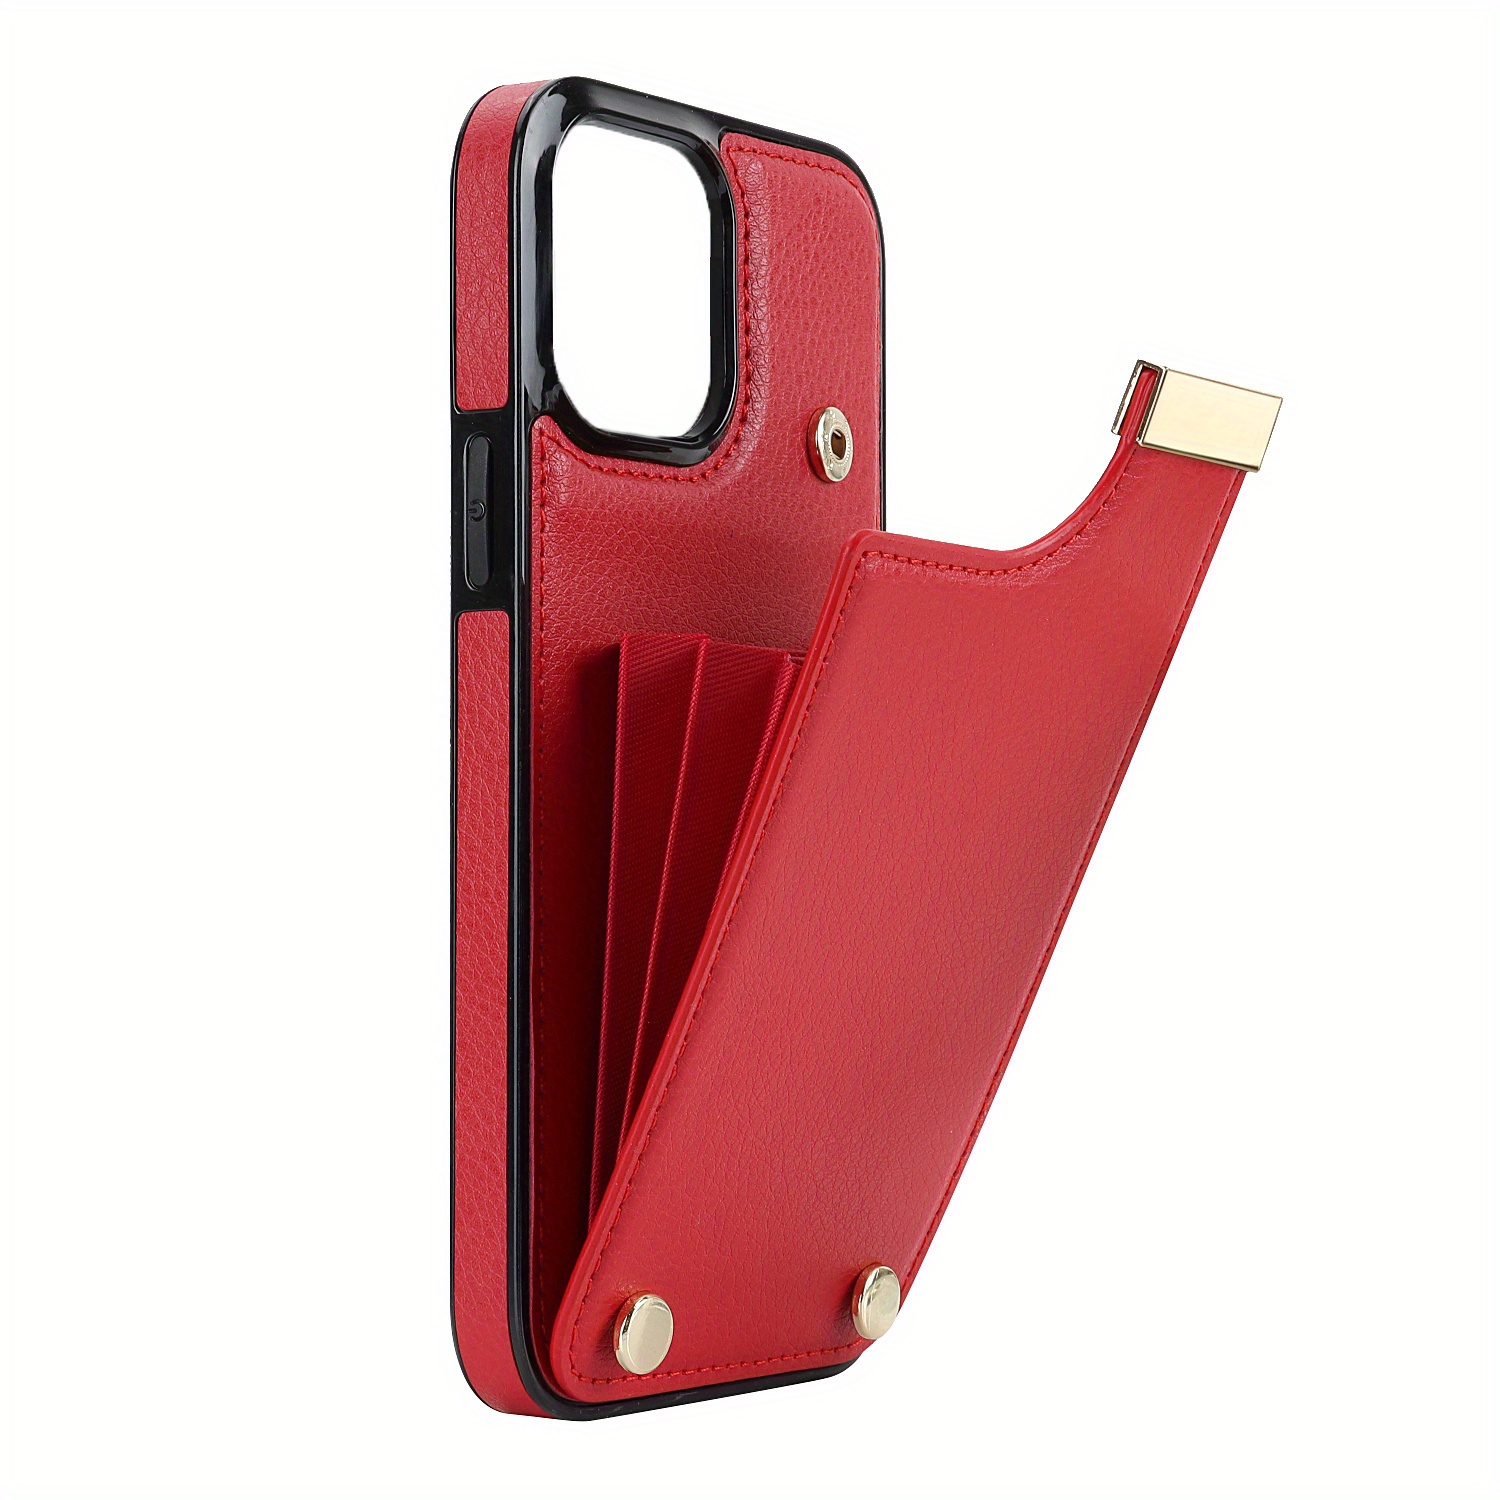 Fashion Square Leather Phone Case For iPhone 11 12 Pro Max XS MAX